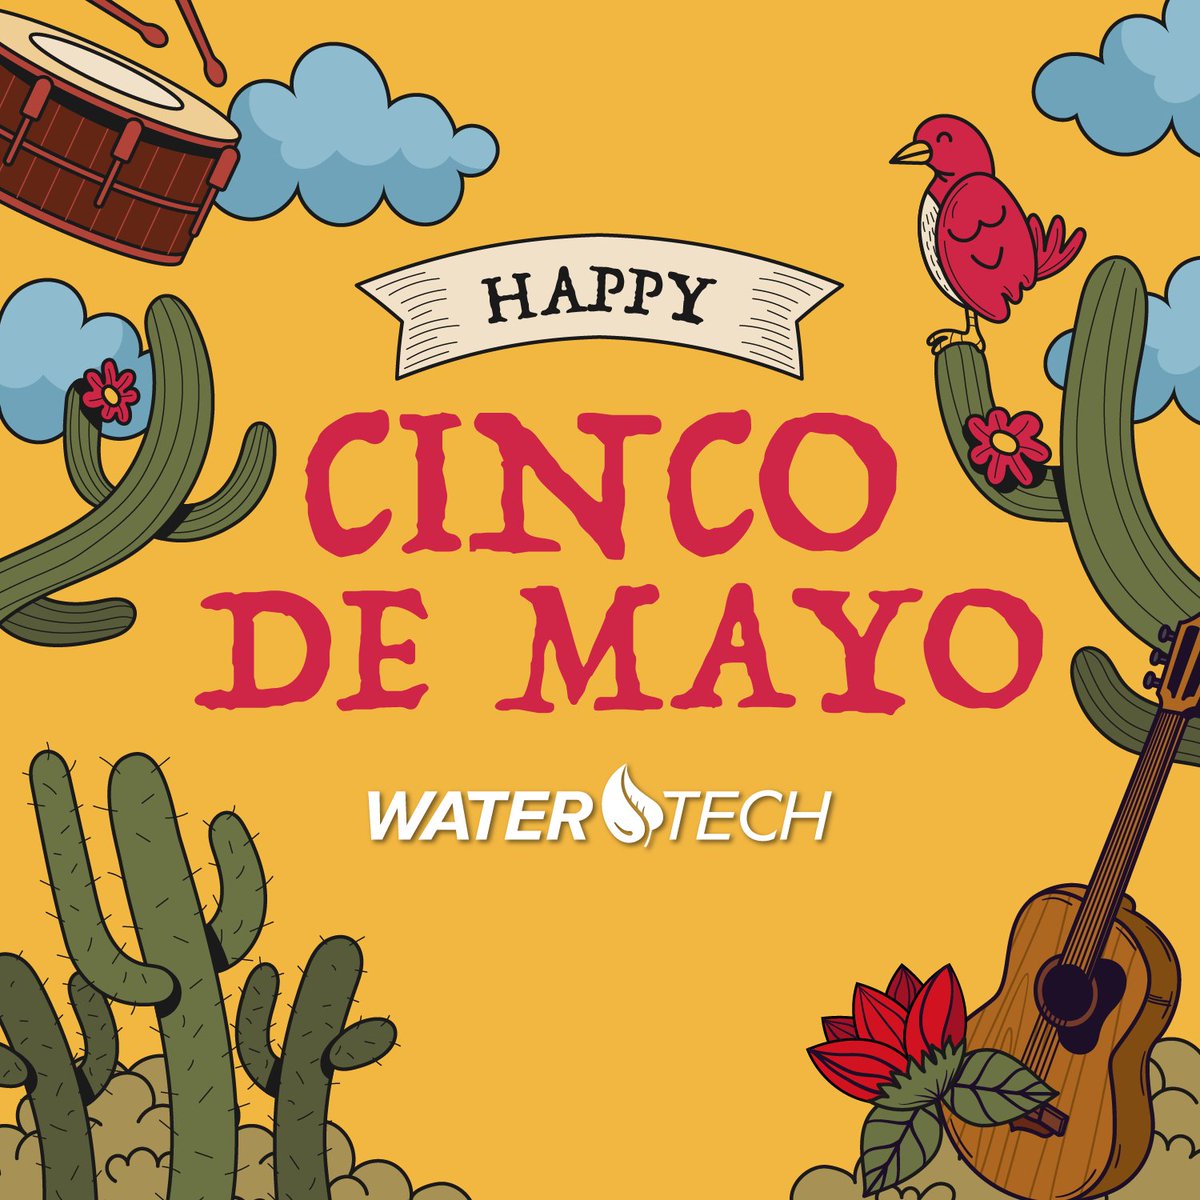 Happy Cinco de Mayo! Whether you're enjoying a fiesta with friends or savoring delicious Mexican cuisine, make sure you stay hydrated with our premium water filtration products. Cheers to good times and great water!
#CincoDeMayo #HappyCincoDeMayo #RefreshWithWater #FilteredWater